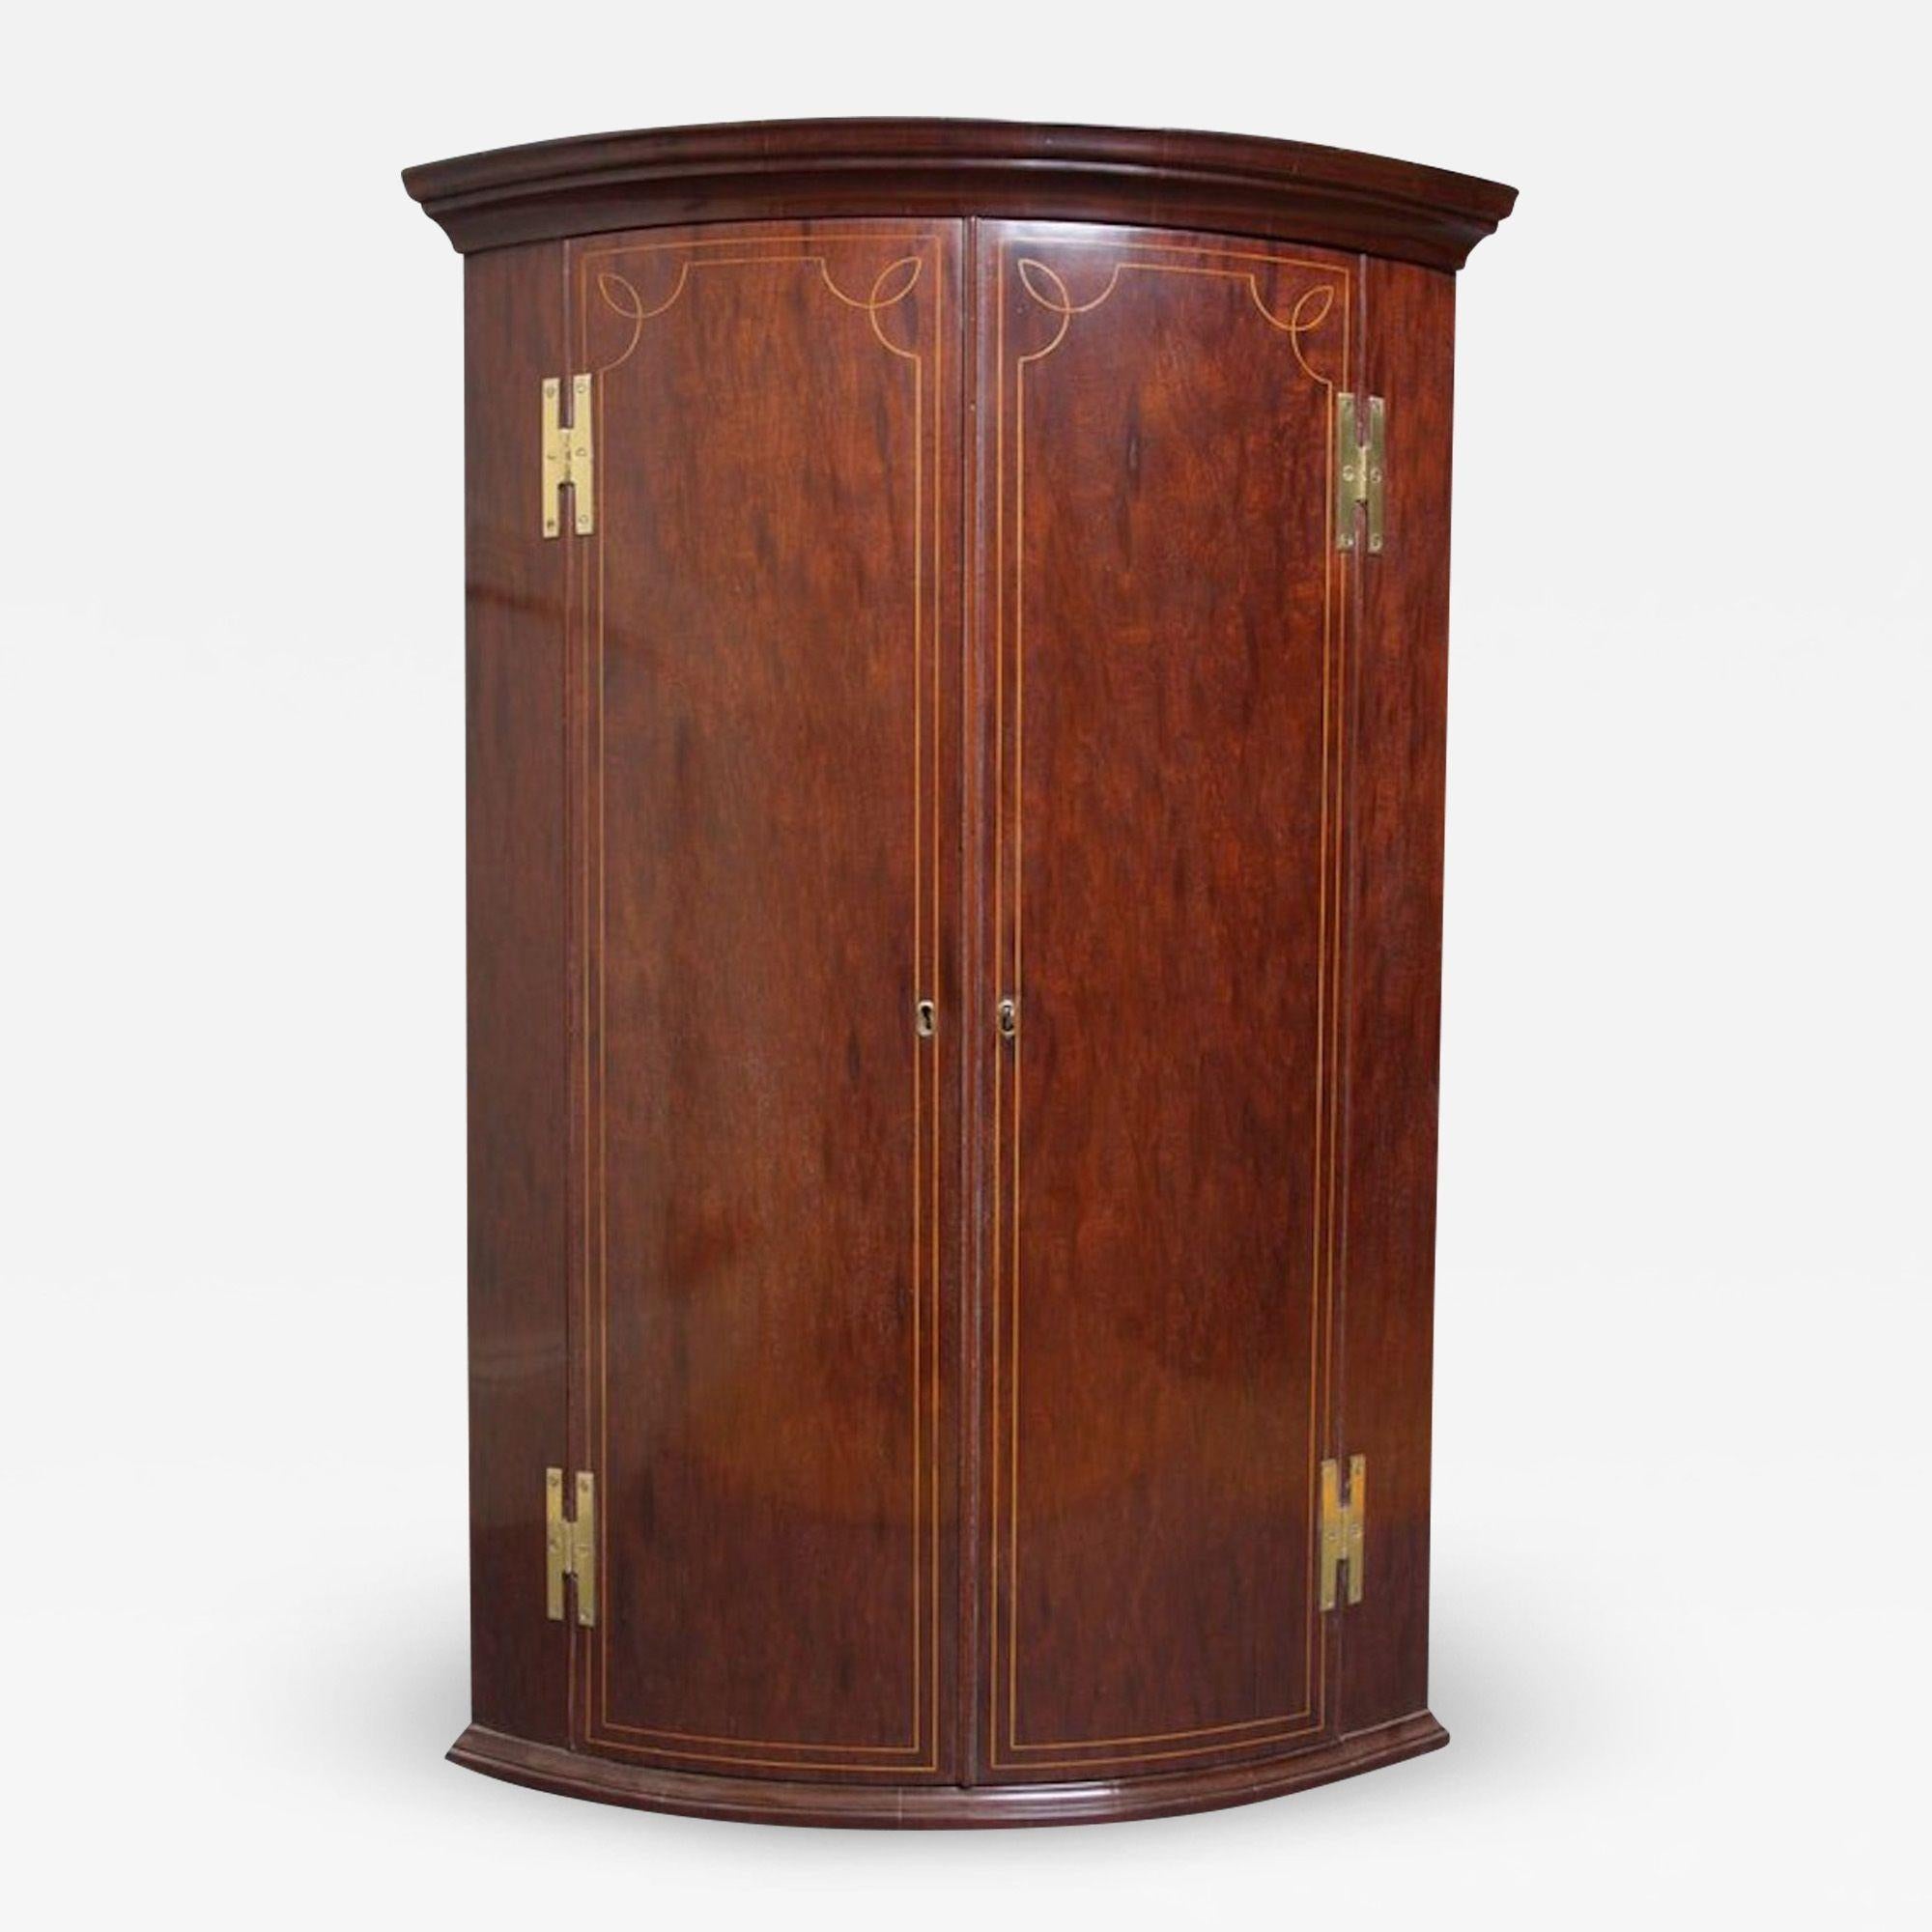 Sn630 Very attractive Regency, bowfronted corner cupboard, having moulded cornice, original, brass, H hinges and string inlaid doors enclosing 3 shelves and 3 spice drawers to base. All in wonderful condition, ready to place at home. circa